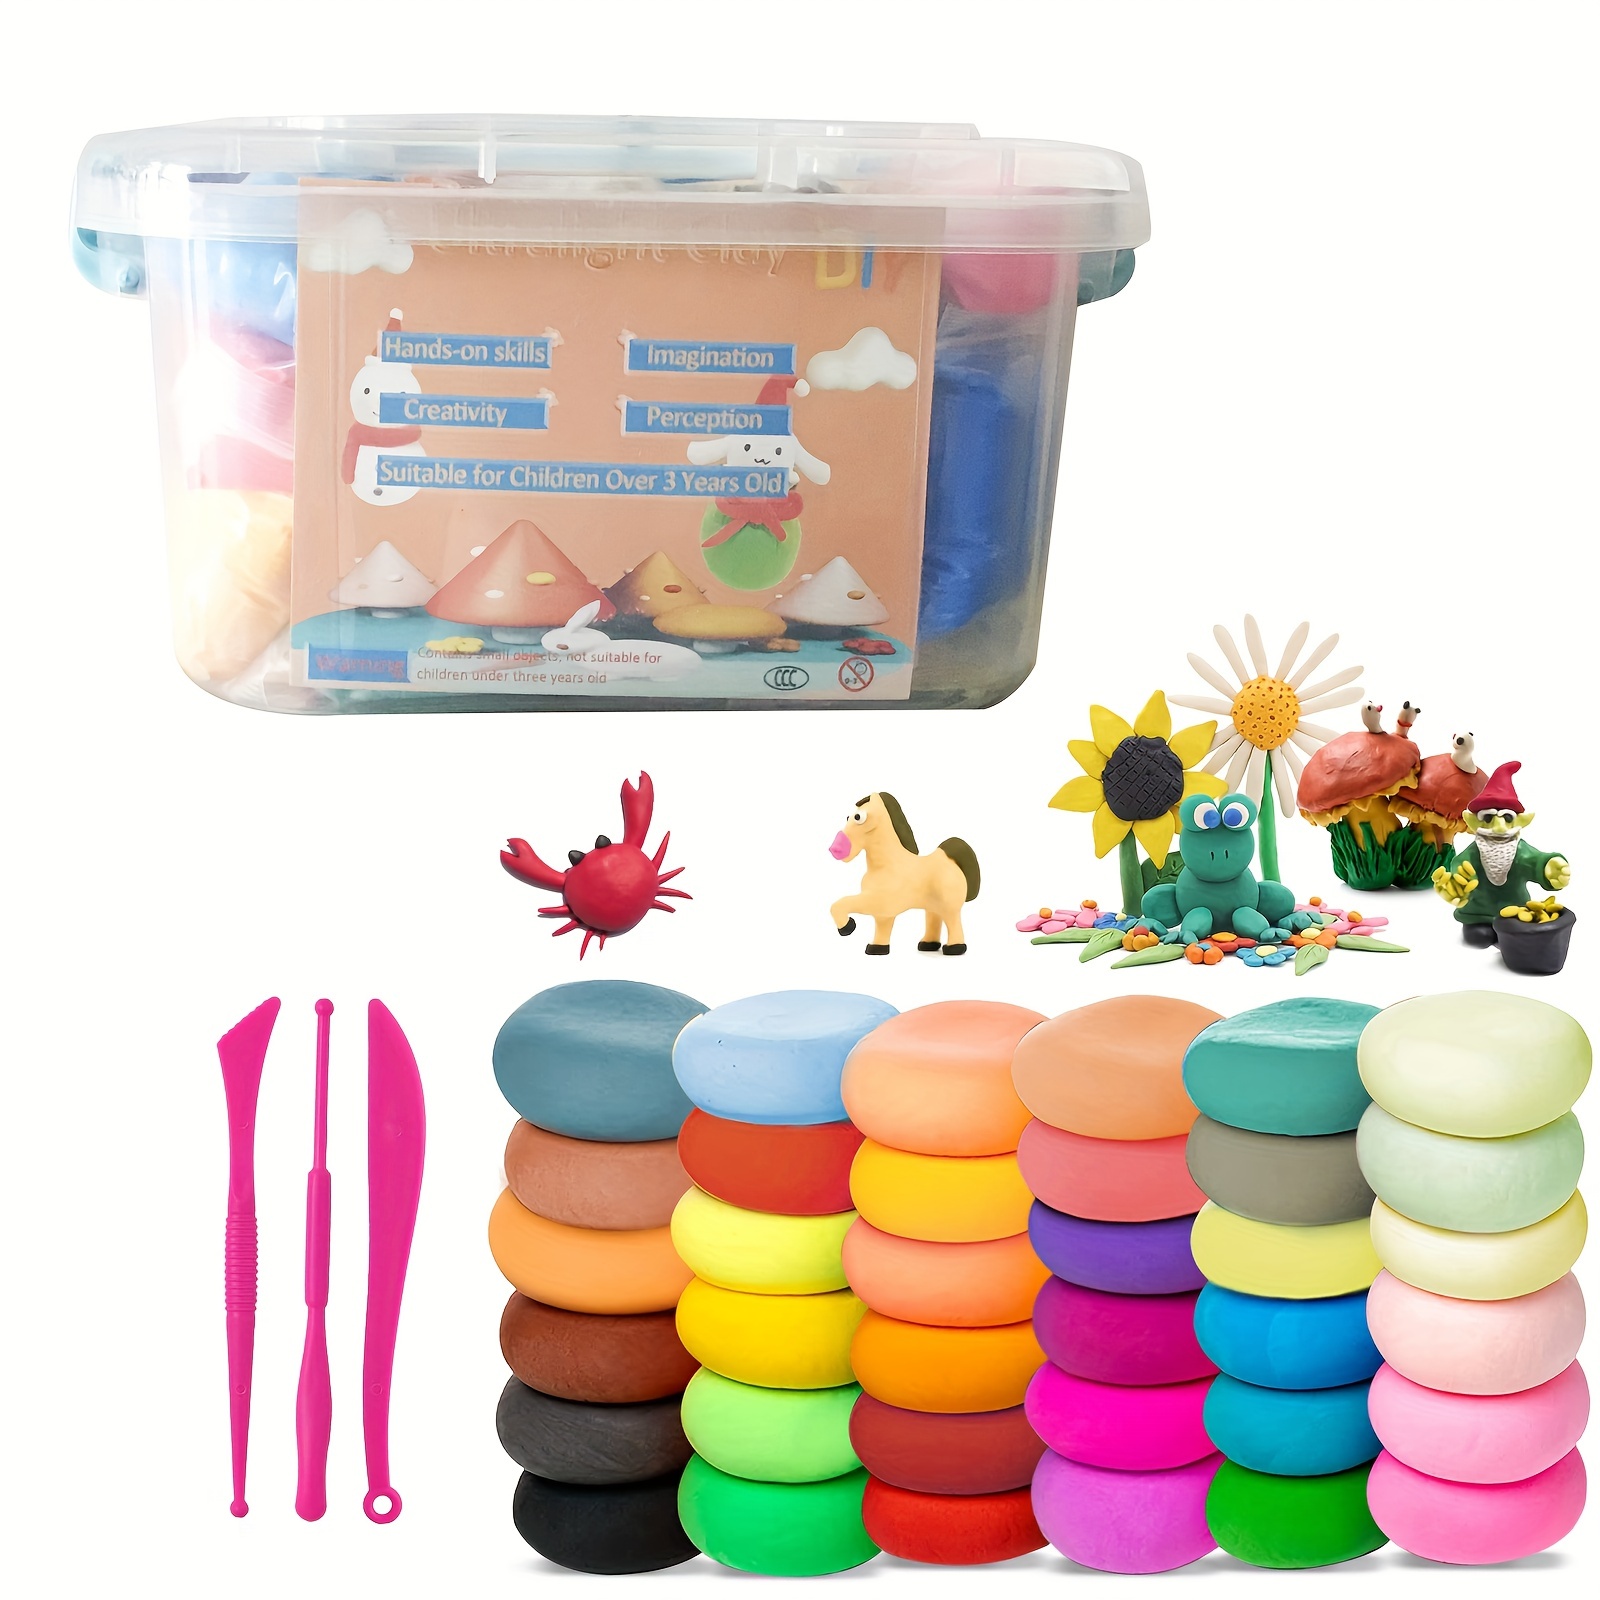 Kids Clay Kit Air Dry Clay Kit DIY Modeling Clay For Kids With Accessories  Tools And